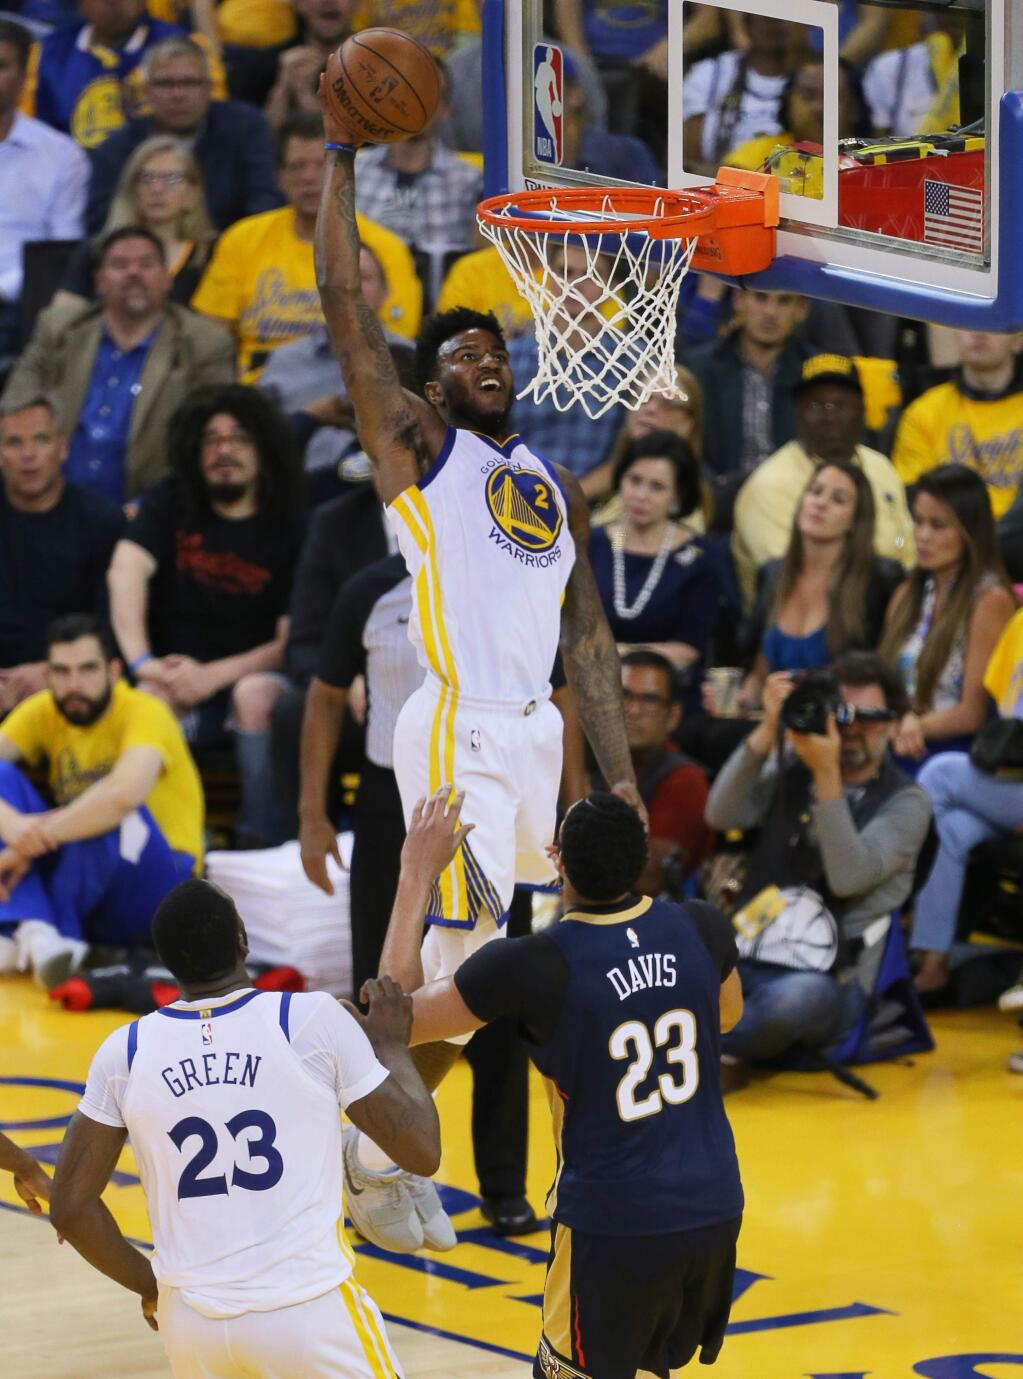 Golden State Warriors center Jordan Bell goes up for a dunk over New Orleans Pelicans center Anthony Davis, during their game in Oakland on Tuesday, May 8, 2018. (Christopher Chung / The Press Democrat)